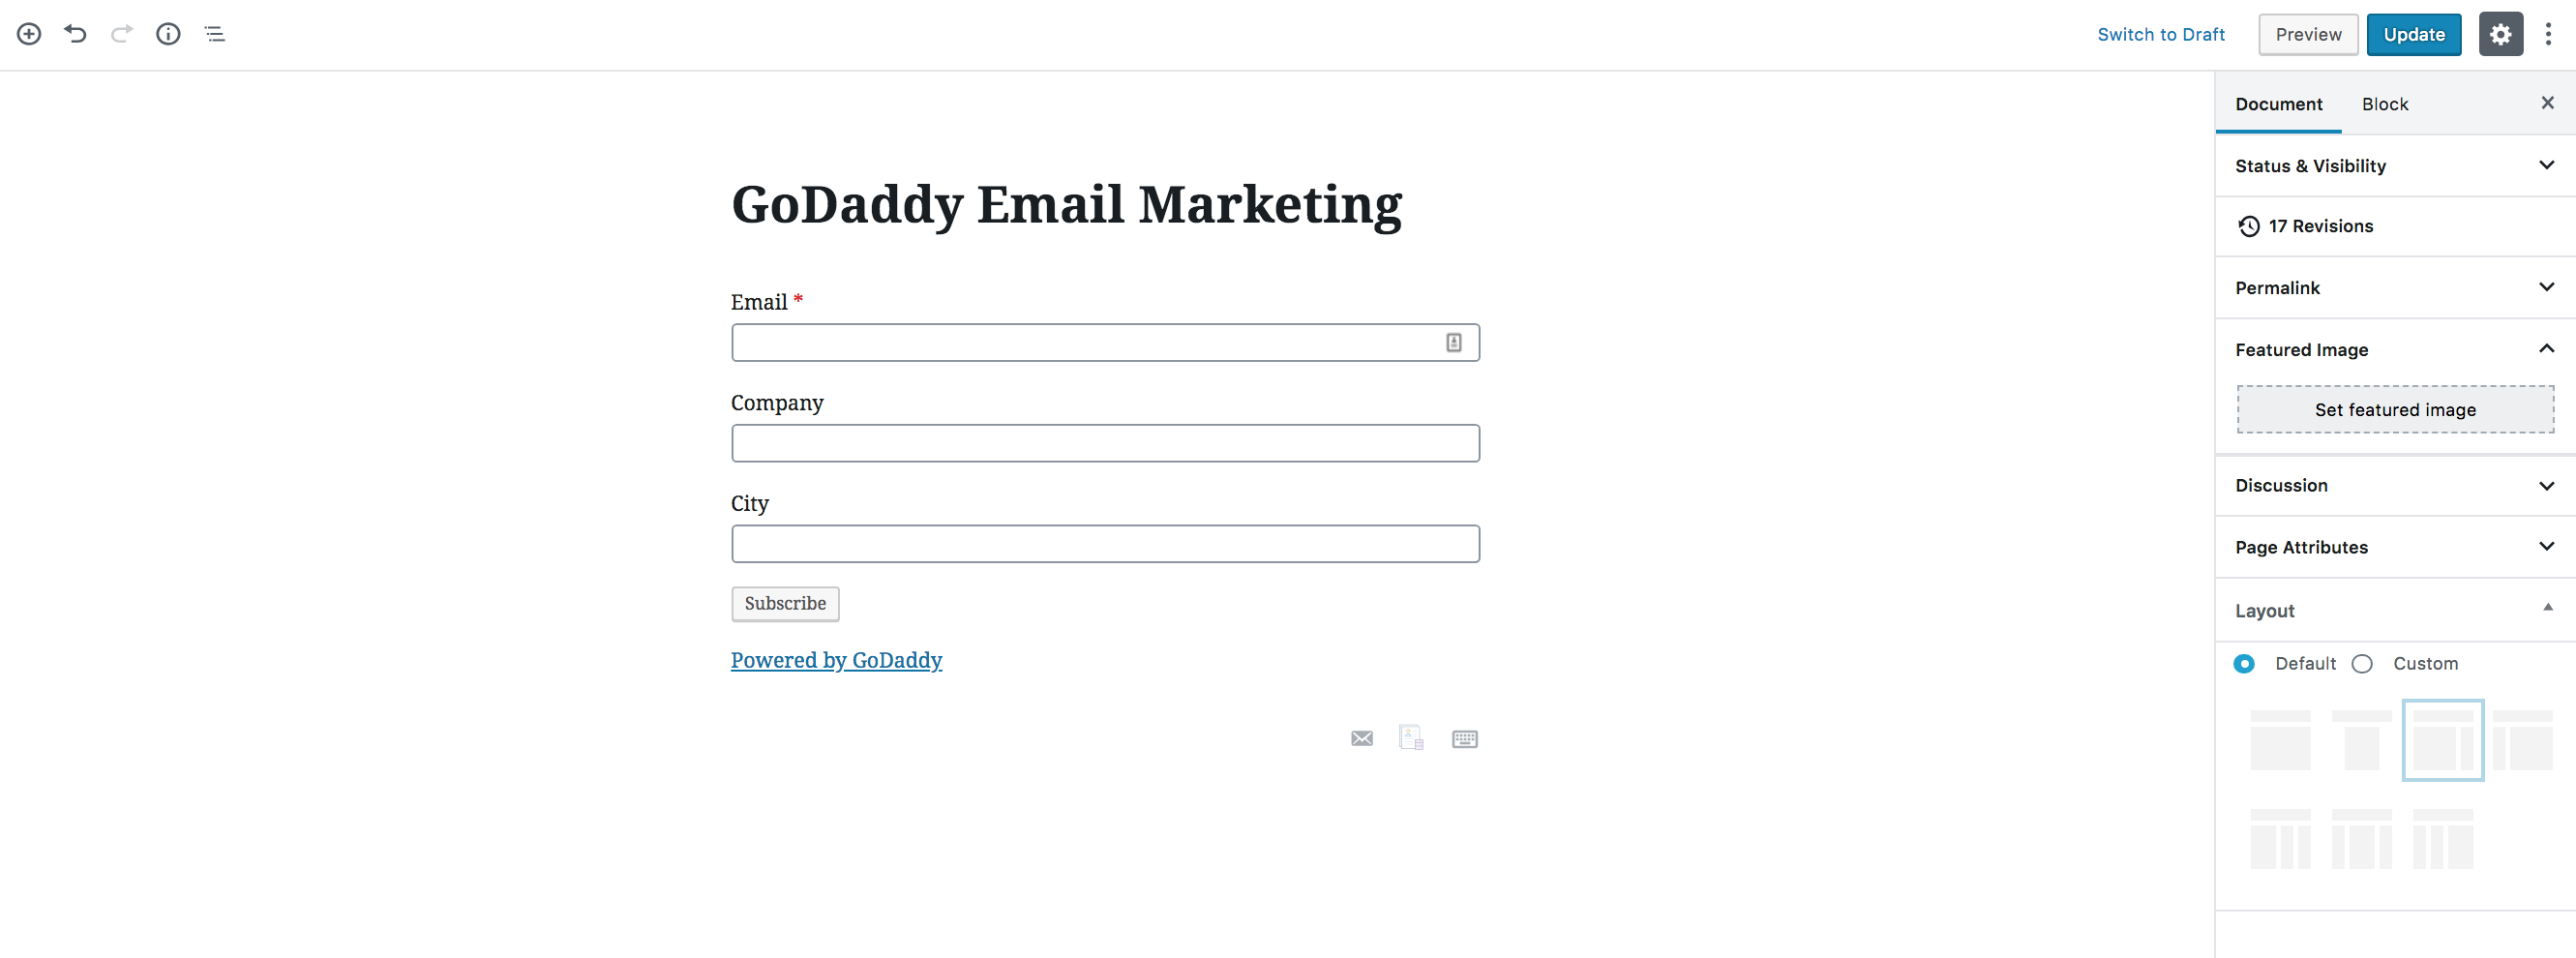 GoDaddy Email Marketing widget preview, in the block editor.